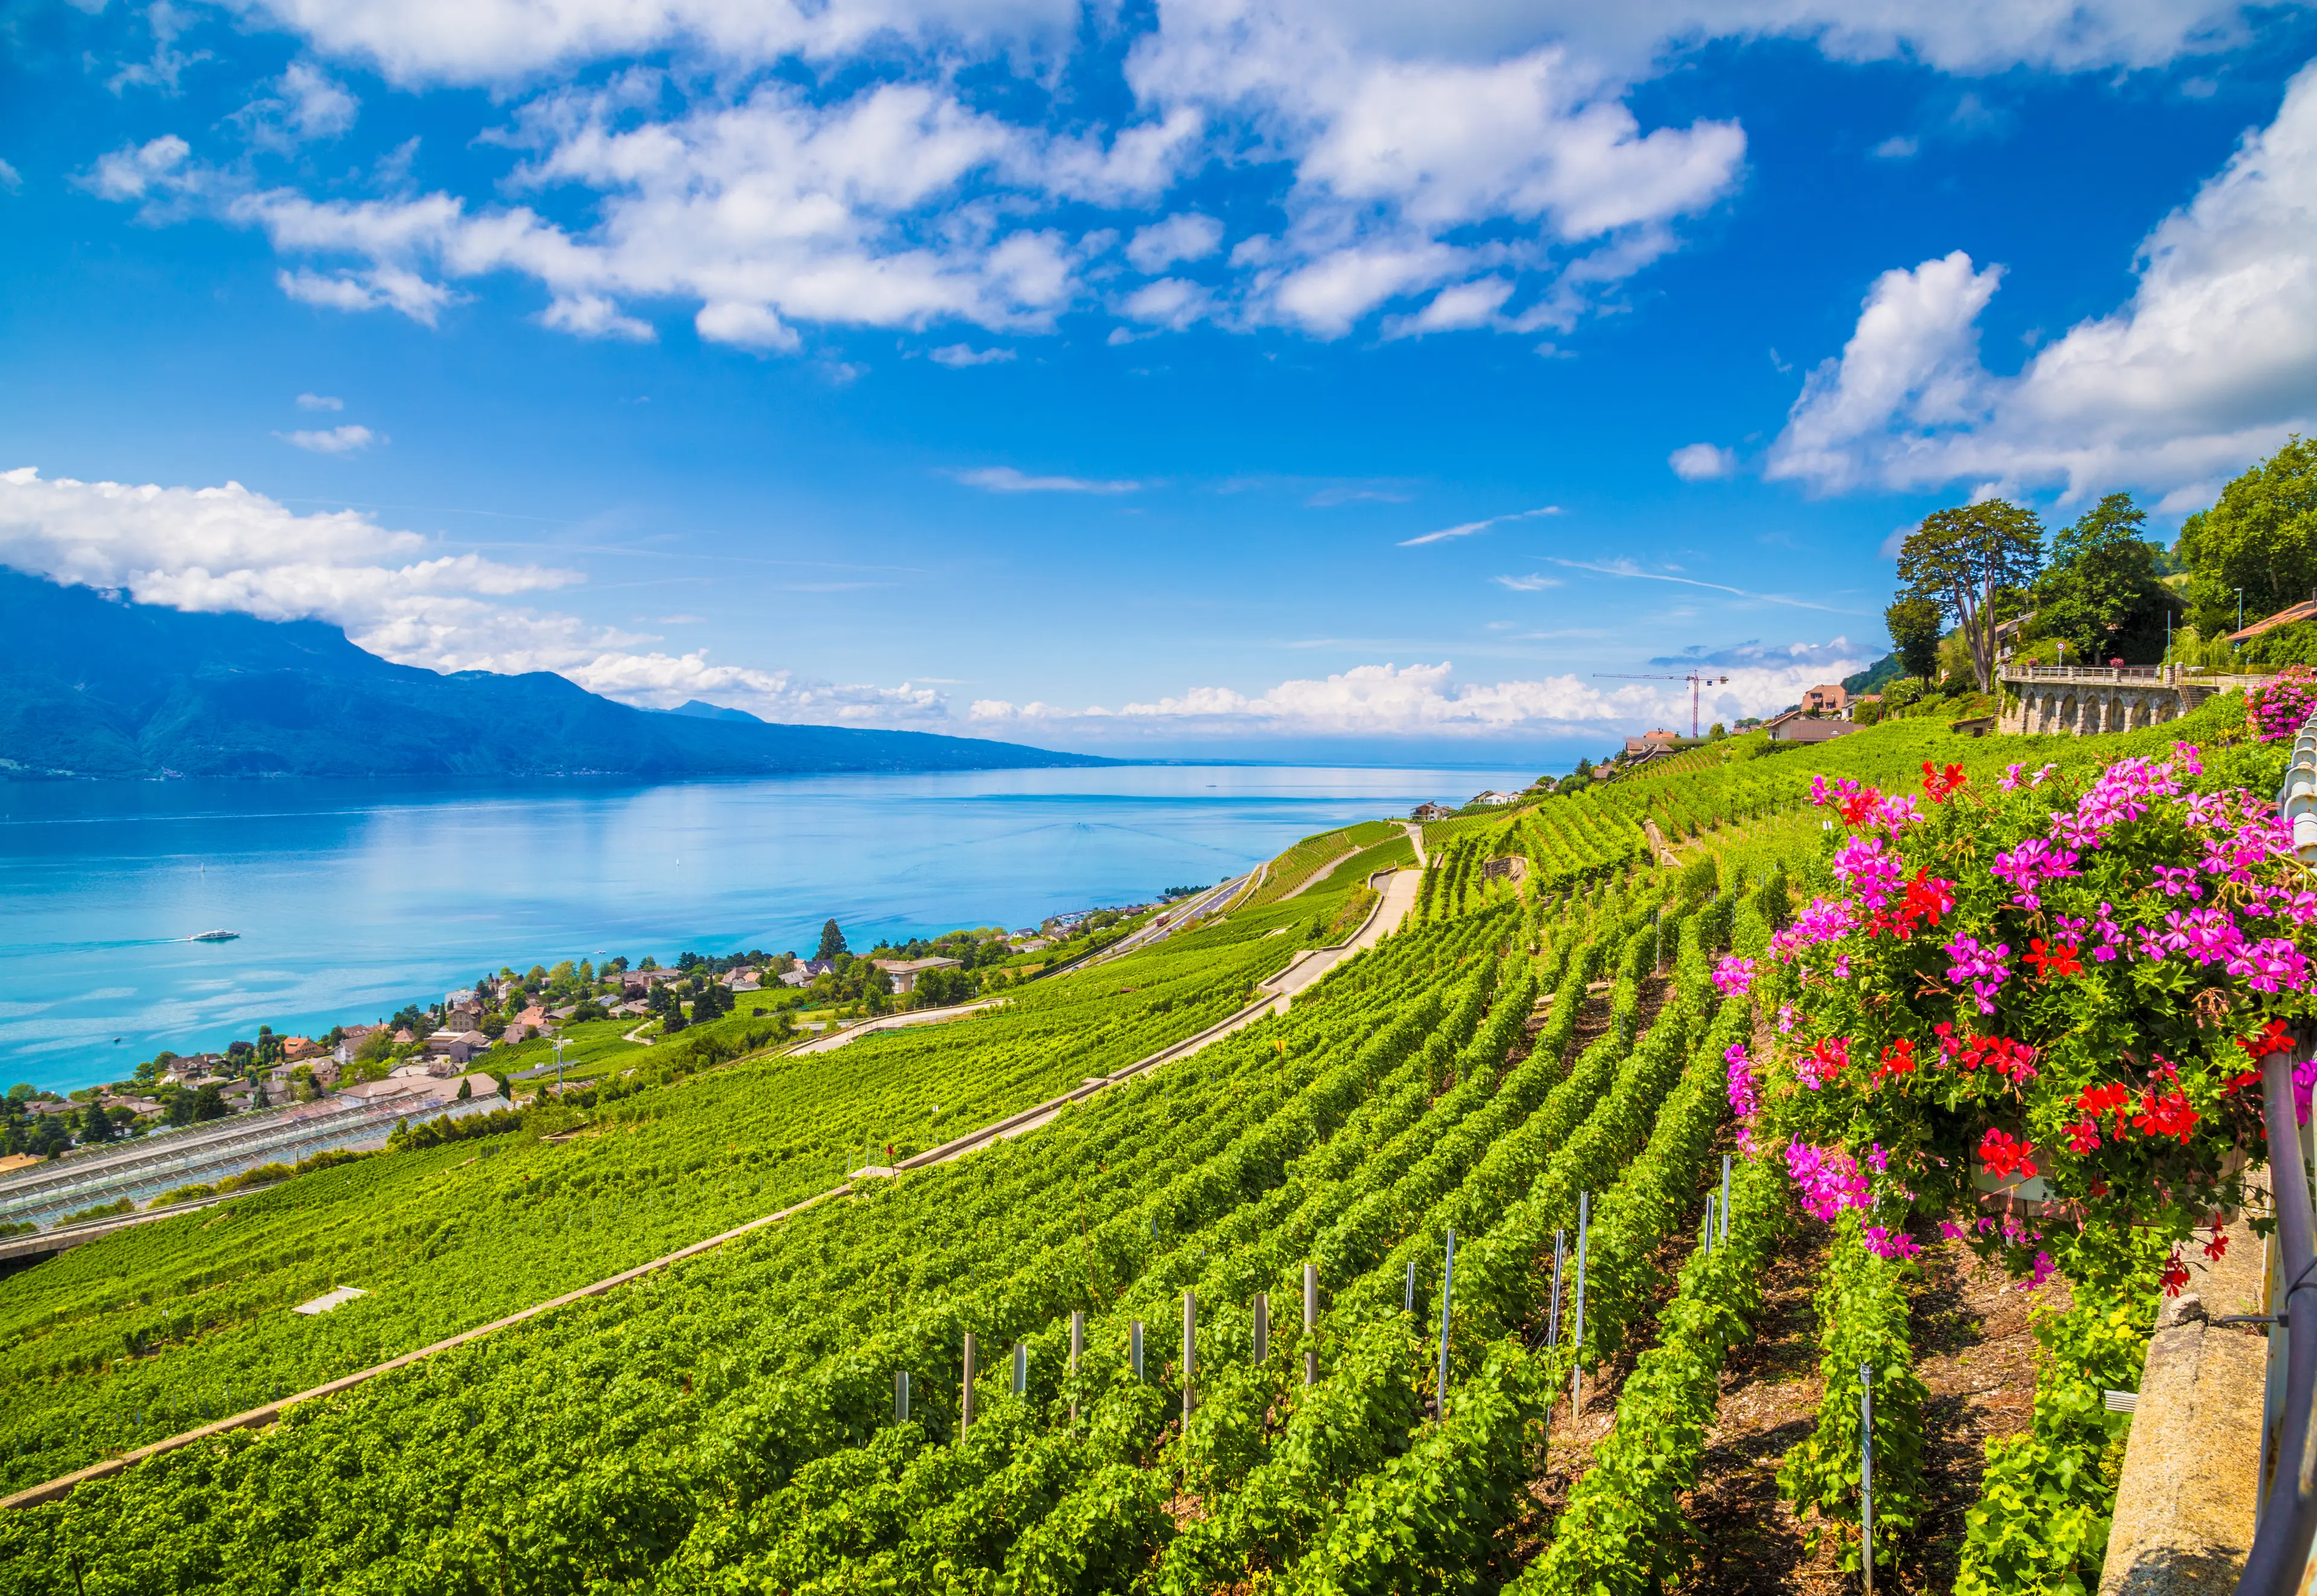 3-Day Family Food, Wine and Sightseeing Trip to Lausanne